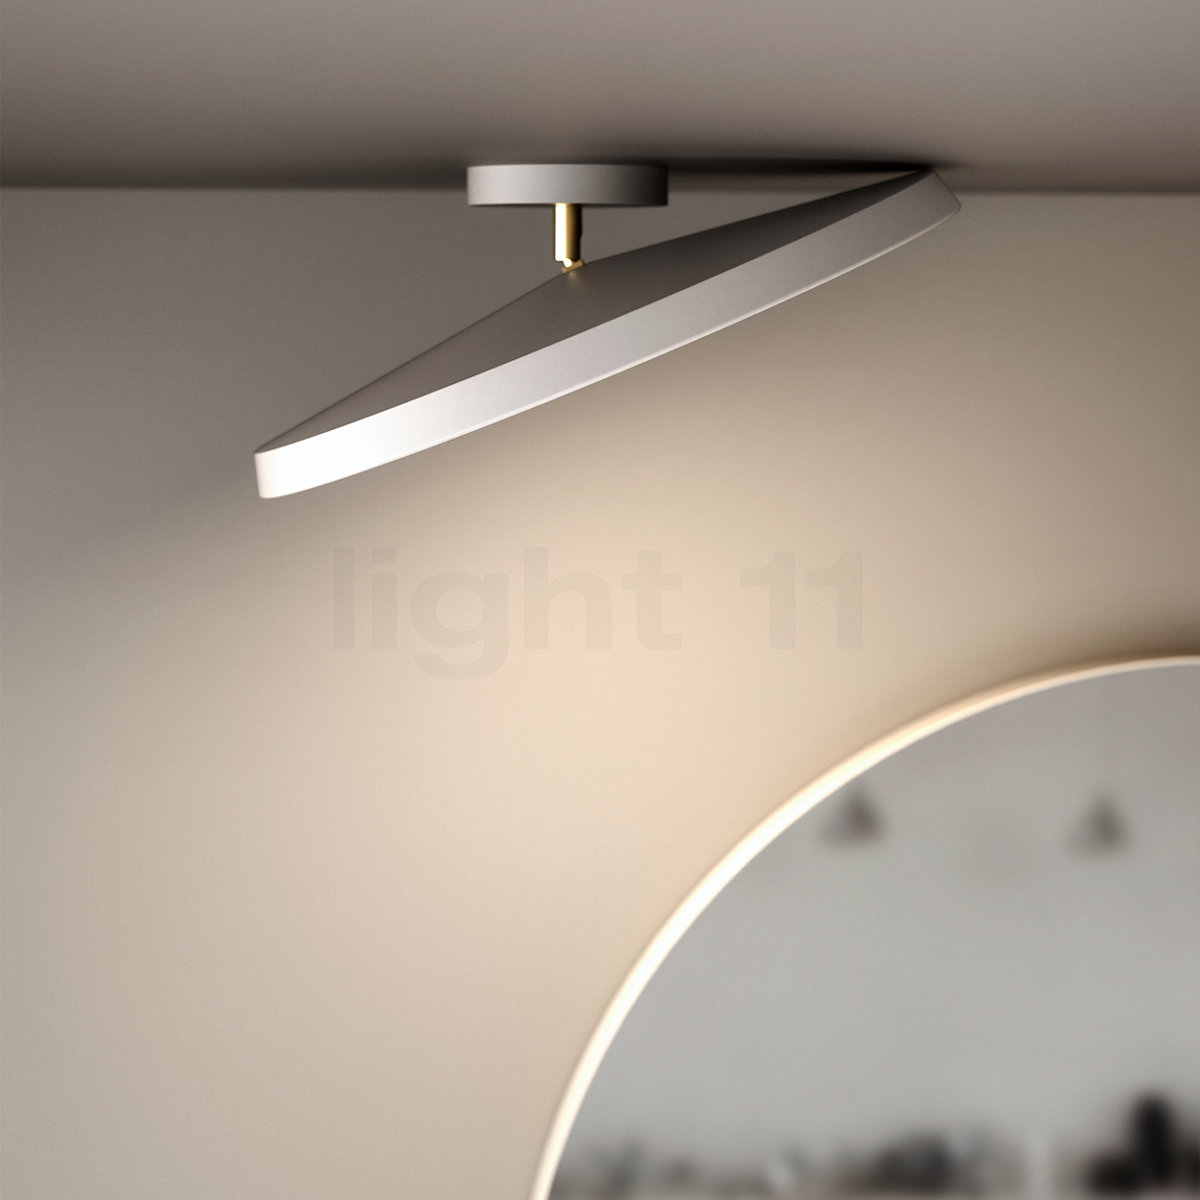 Light People the Design Kaito LED Pro Ceiling Buy at for